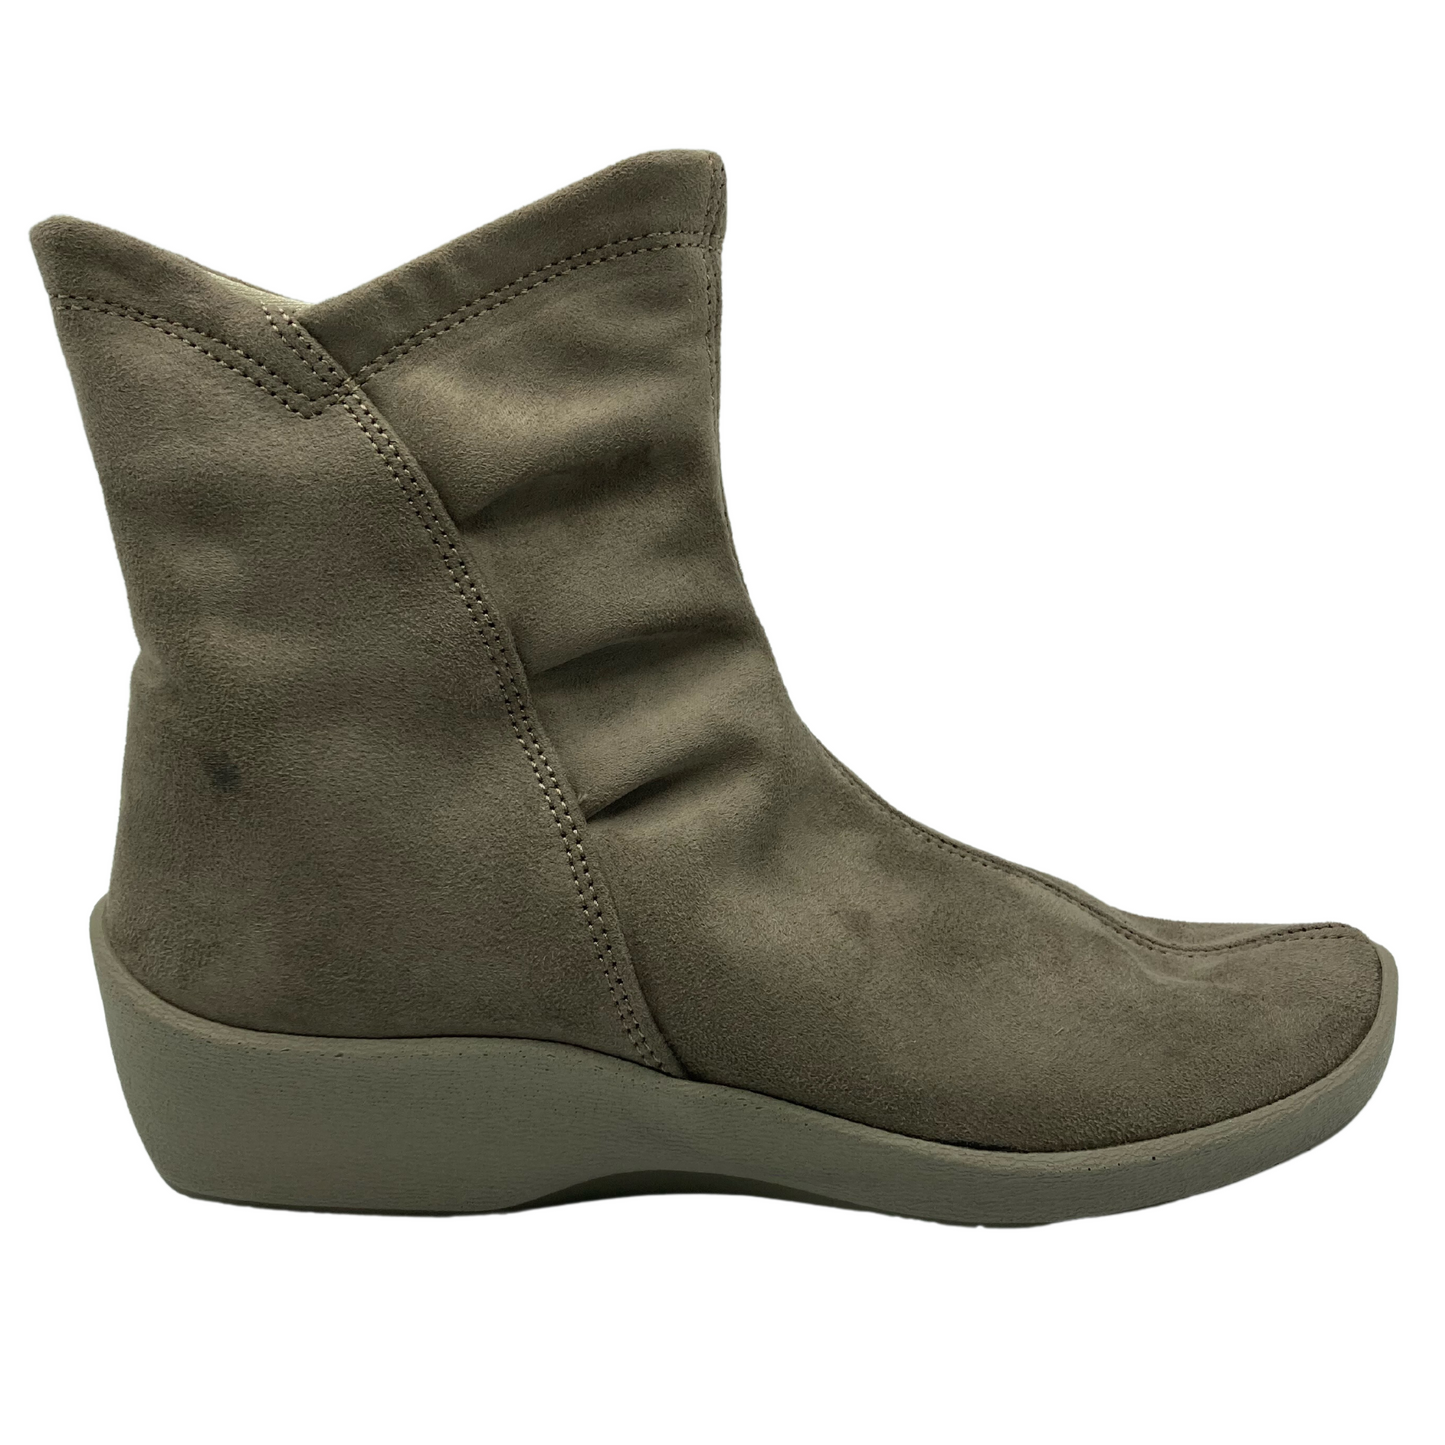 Right facing view of faux suede short boot with matching rubber sole and rounded toe